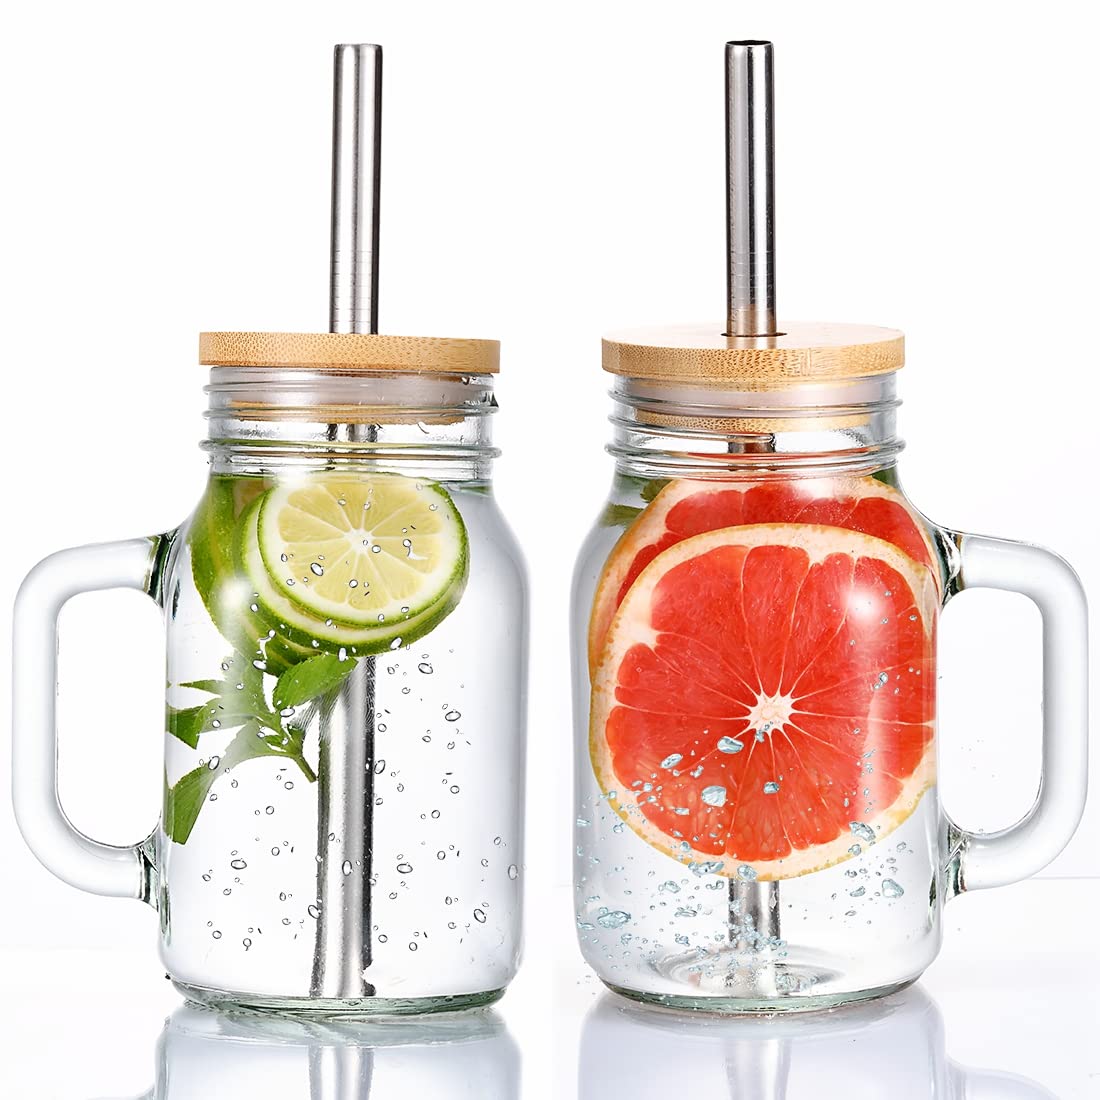 AmzFan Mason Jar with Lid and Straw, 2 Pack 20 OZ Mason Jars with Handle, Mason Jar Cups, Drinking Glasses Tumbler Reusable Boba Cups Smoothie Water Bottles for Iced Coffee, Milkshake, Smoothie, Tea